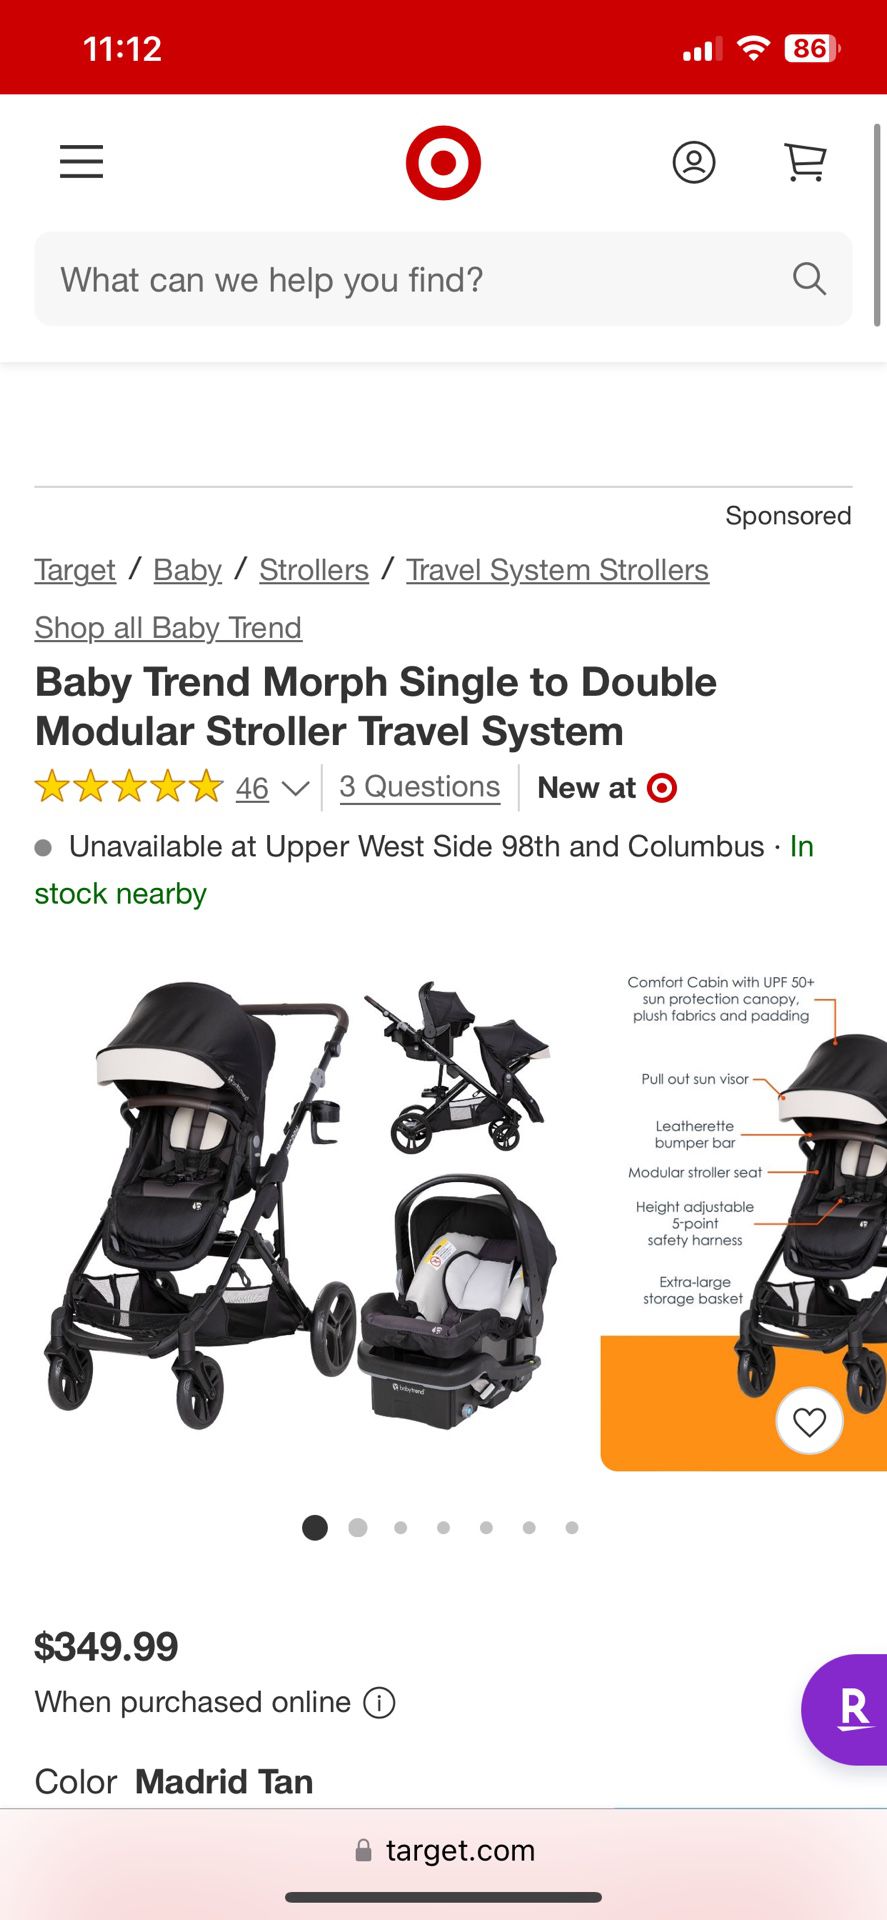 Baby Trend Morph Single to Double Modular Stroller Travel System